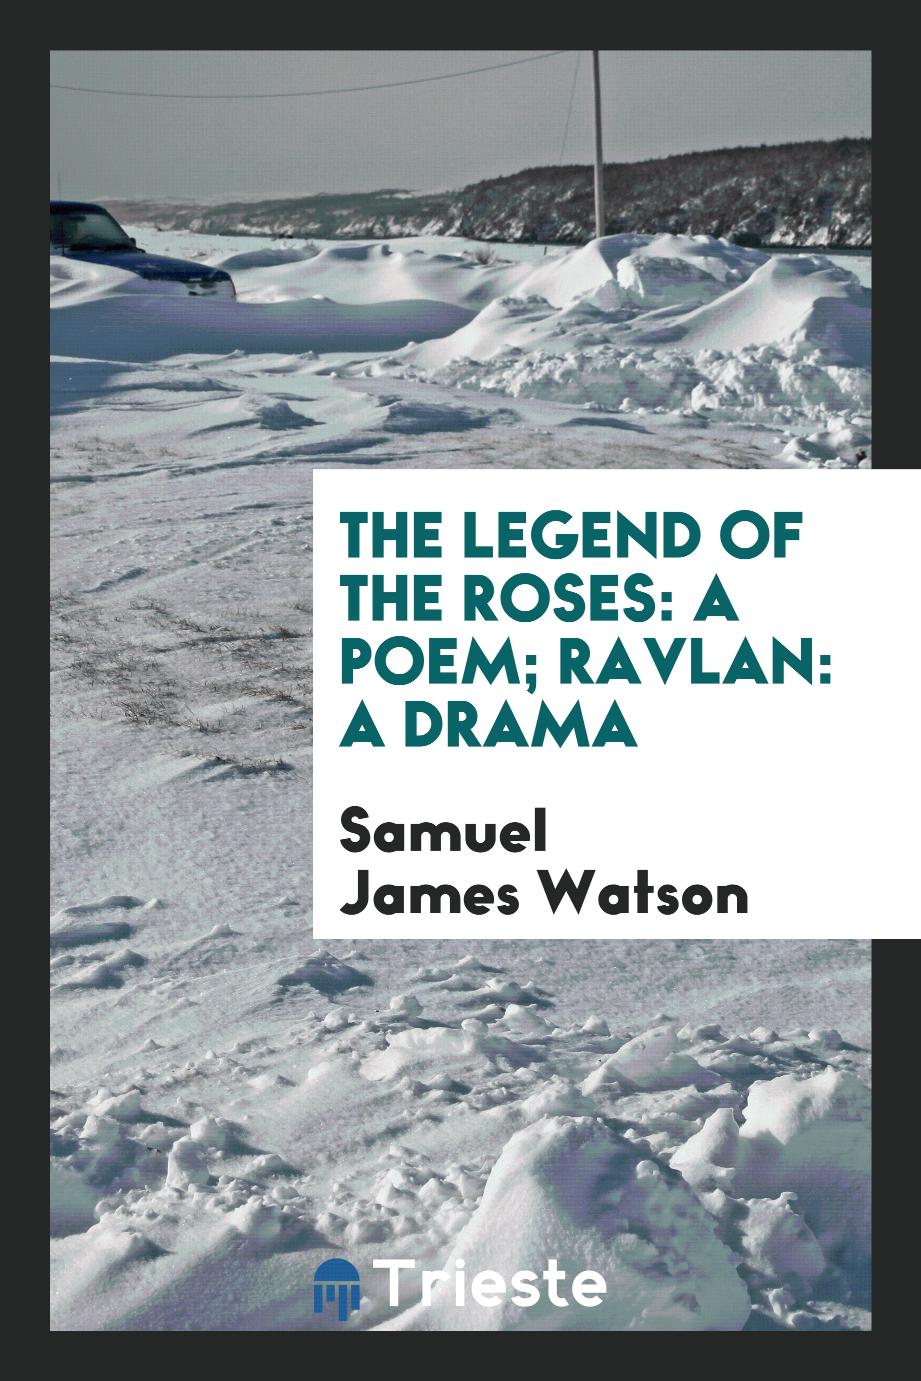 The legend of the roses: a poem; Ravlan: a drama